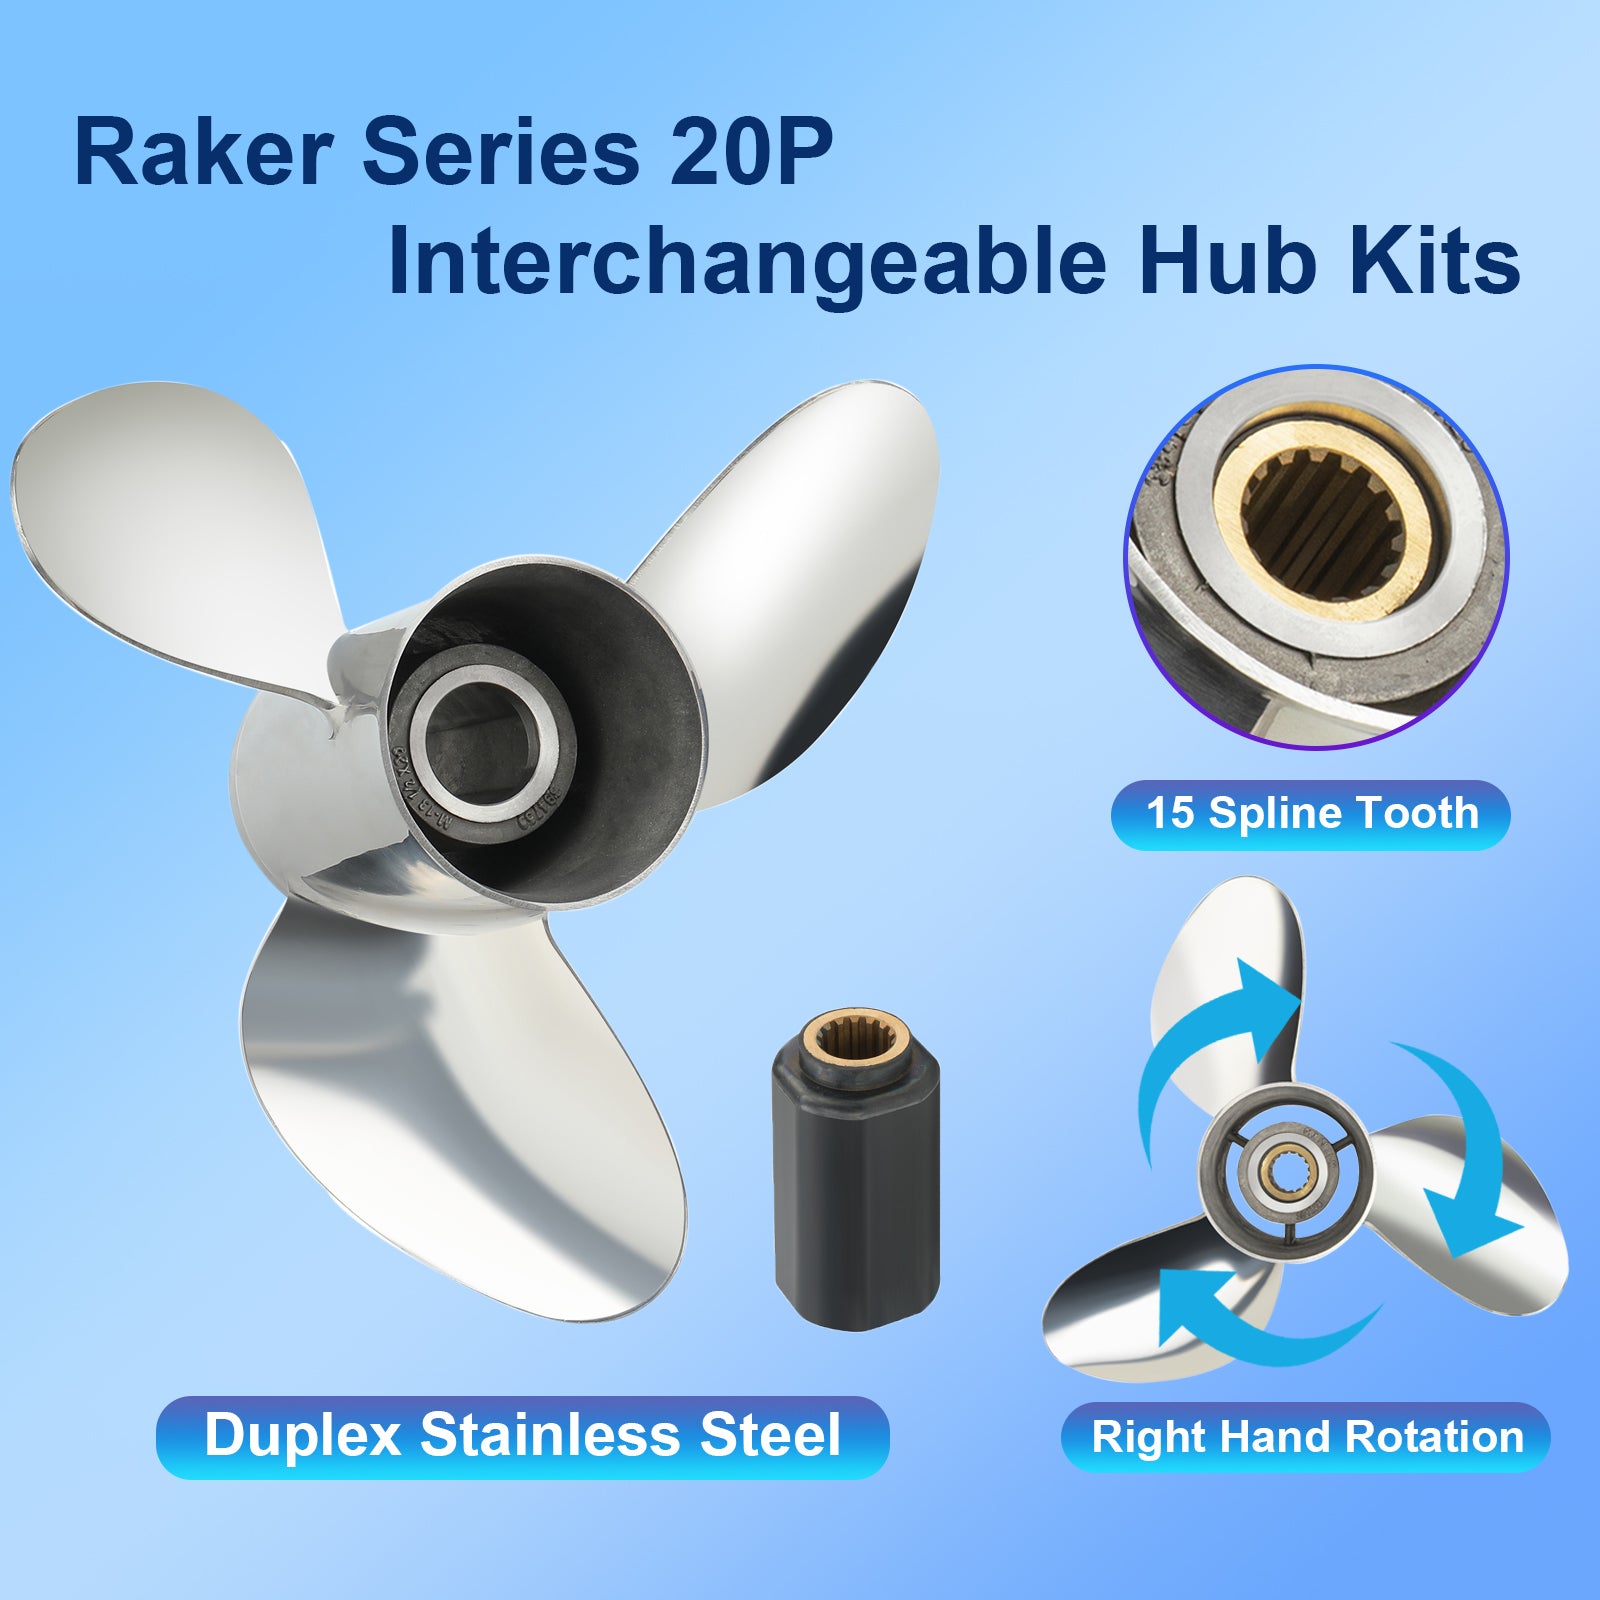 13 1/2x20 Raker Series OEM Stainless Steel Propeller Fit Yamaha Outboard Engines 70-100hp/OMC Motos 70-90hp 15 Tooth,RH